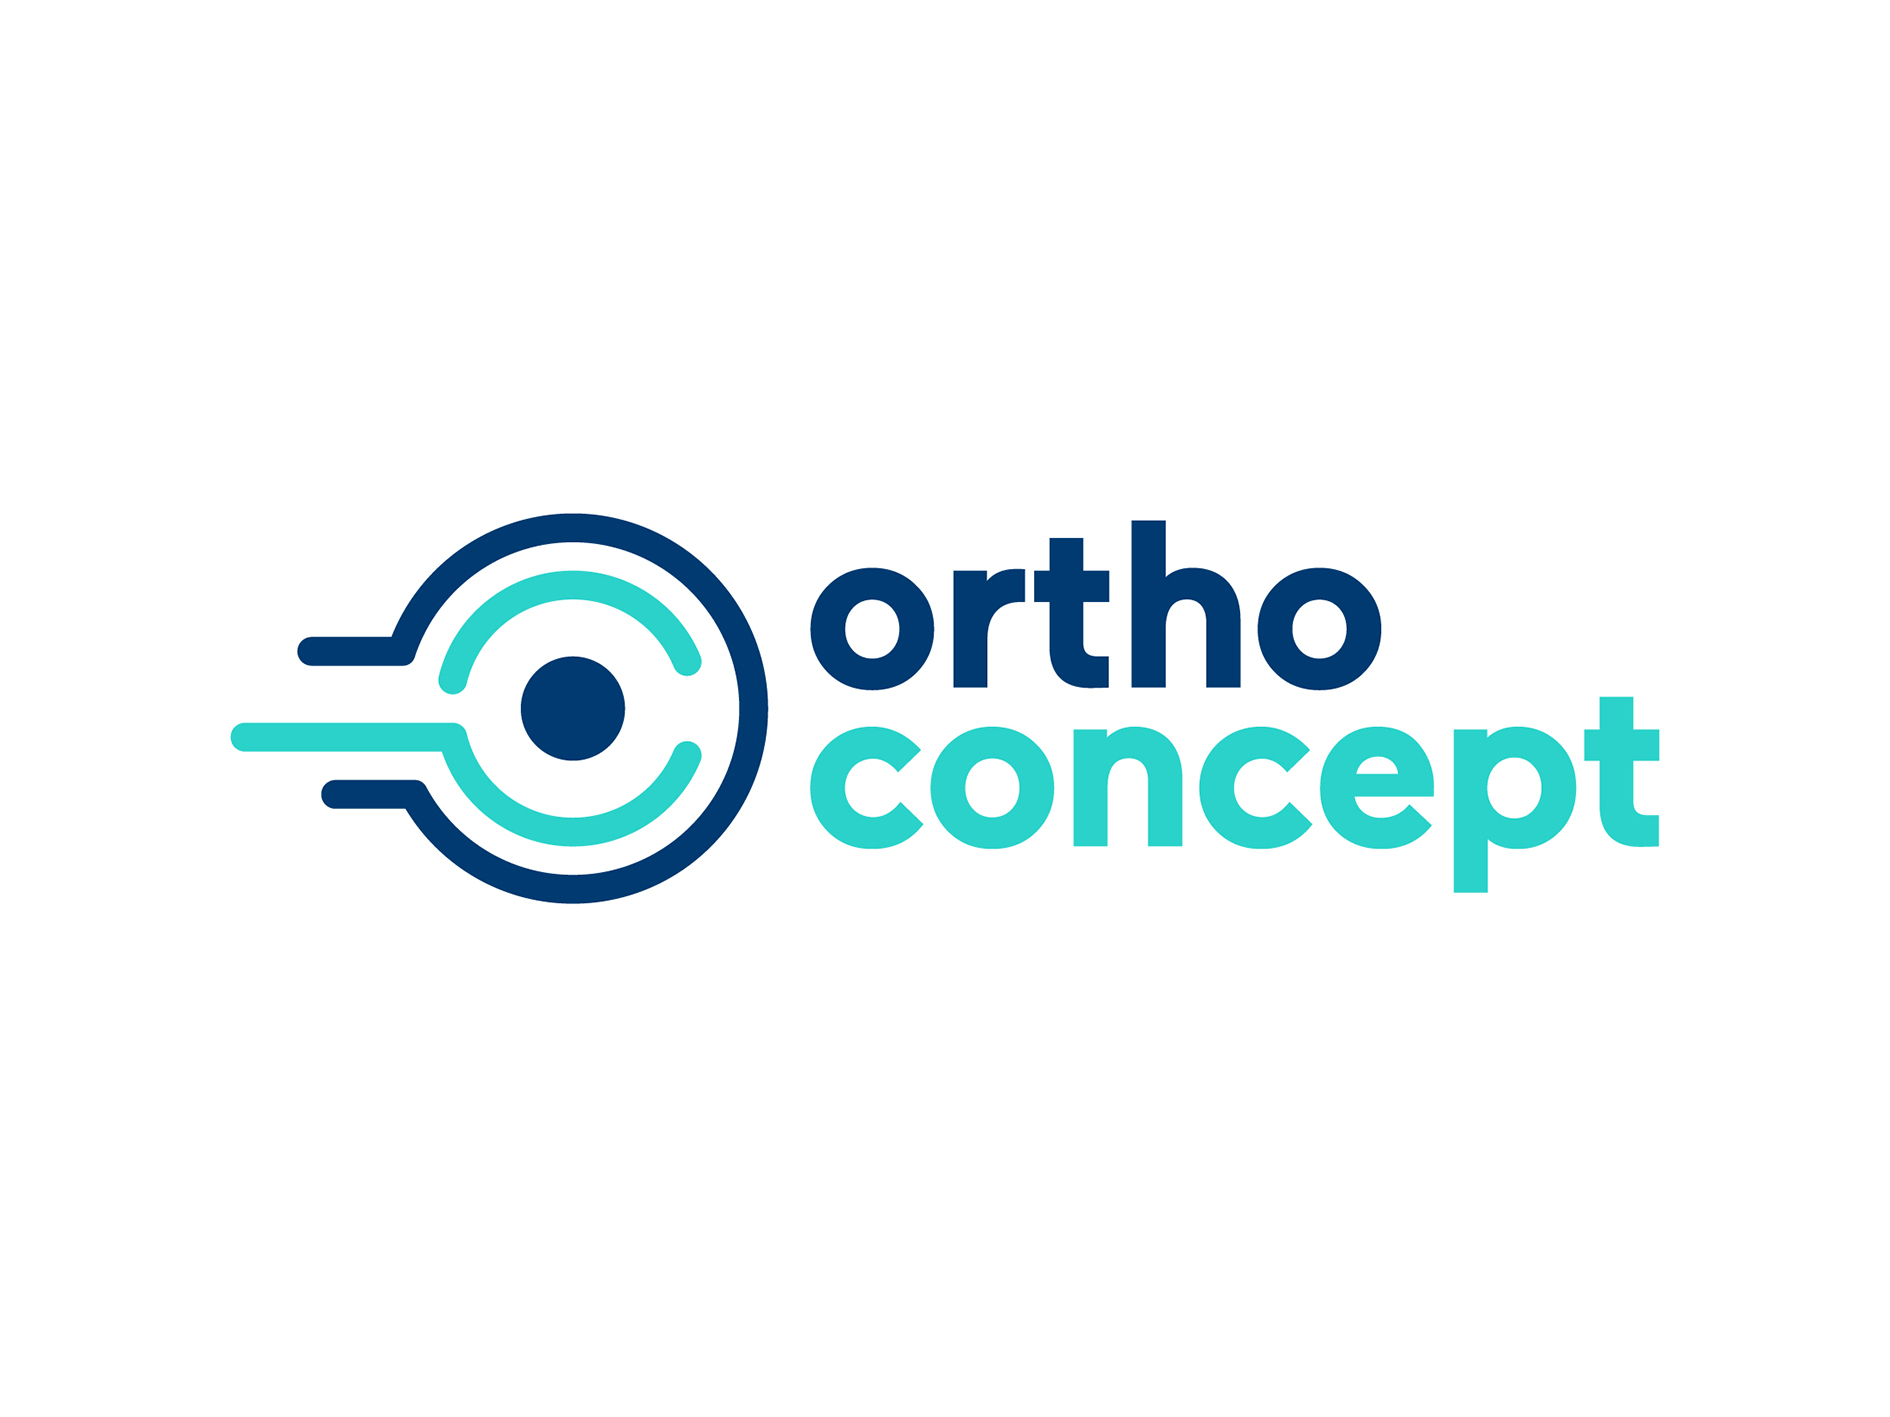 Ortho Concept